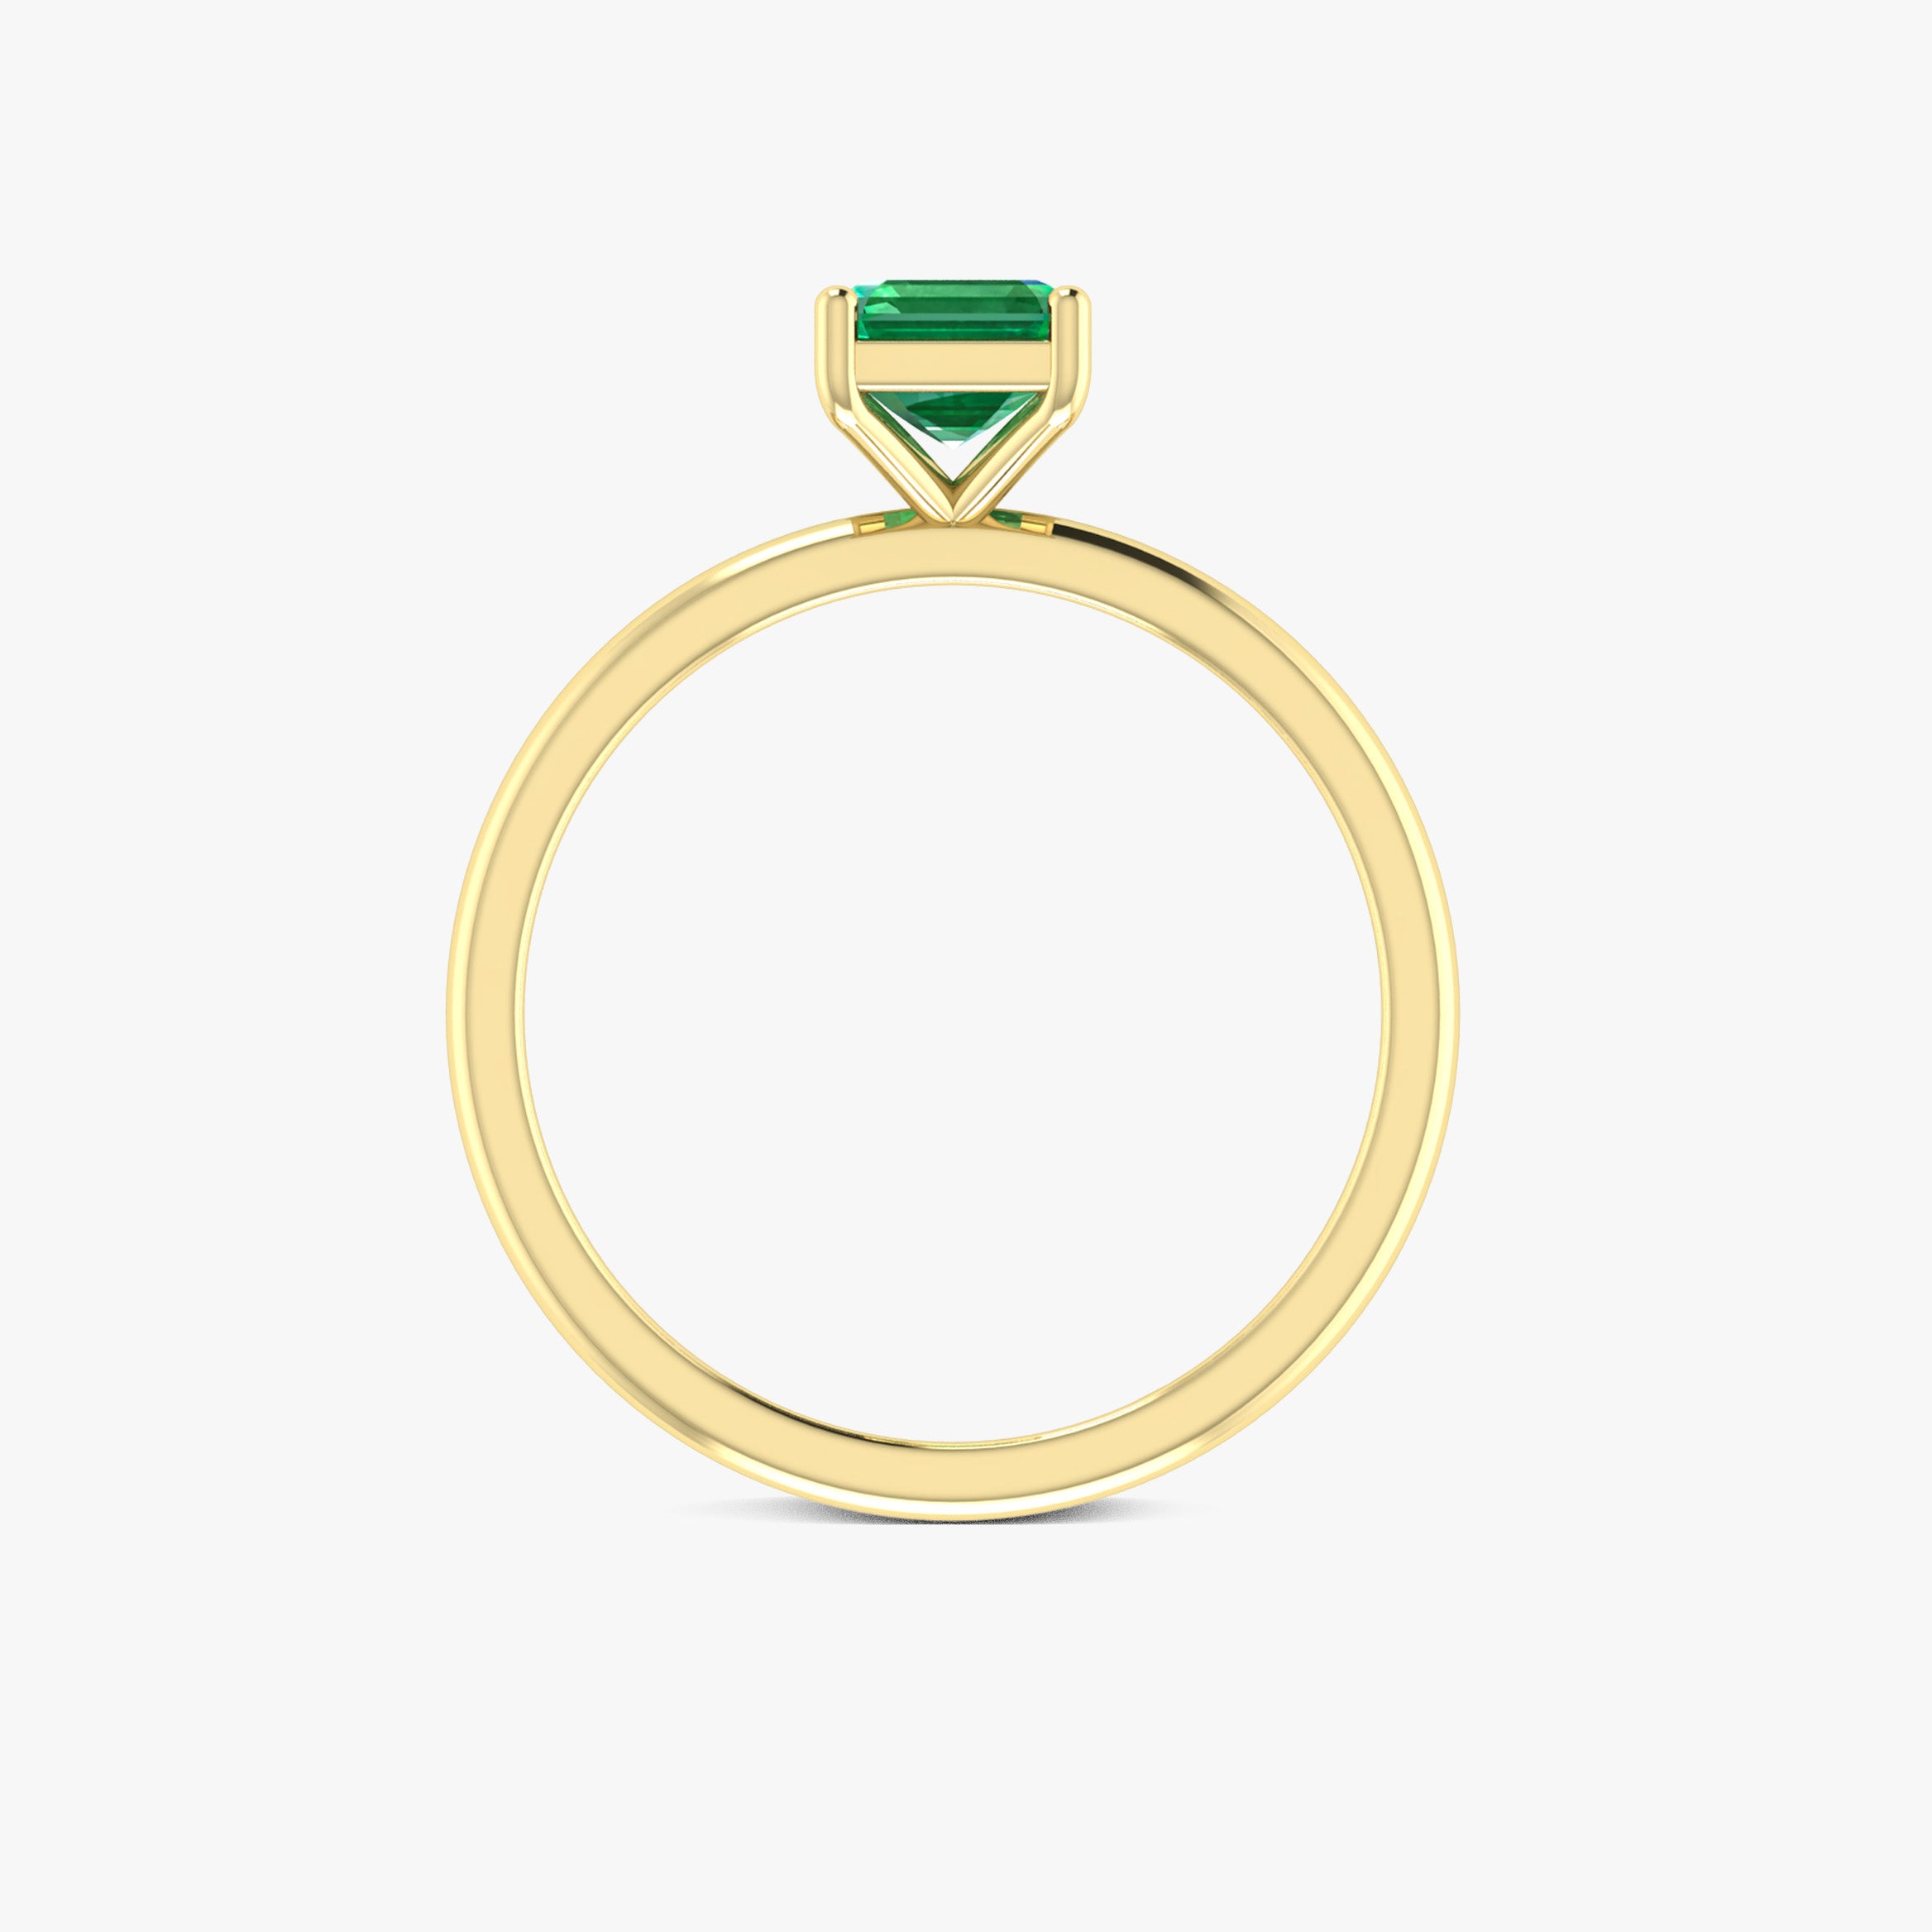 Green Emerald Faceted Cut Gemstone Ring